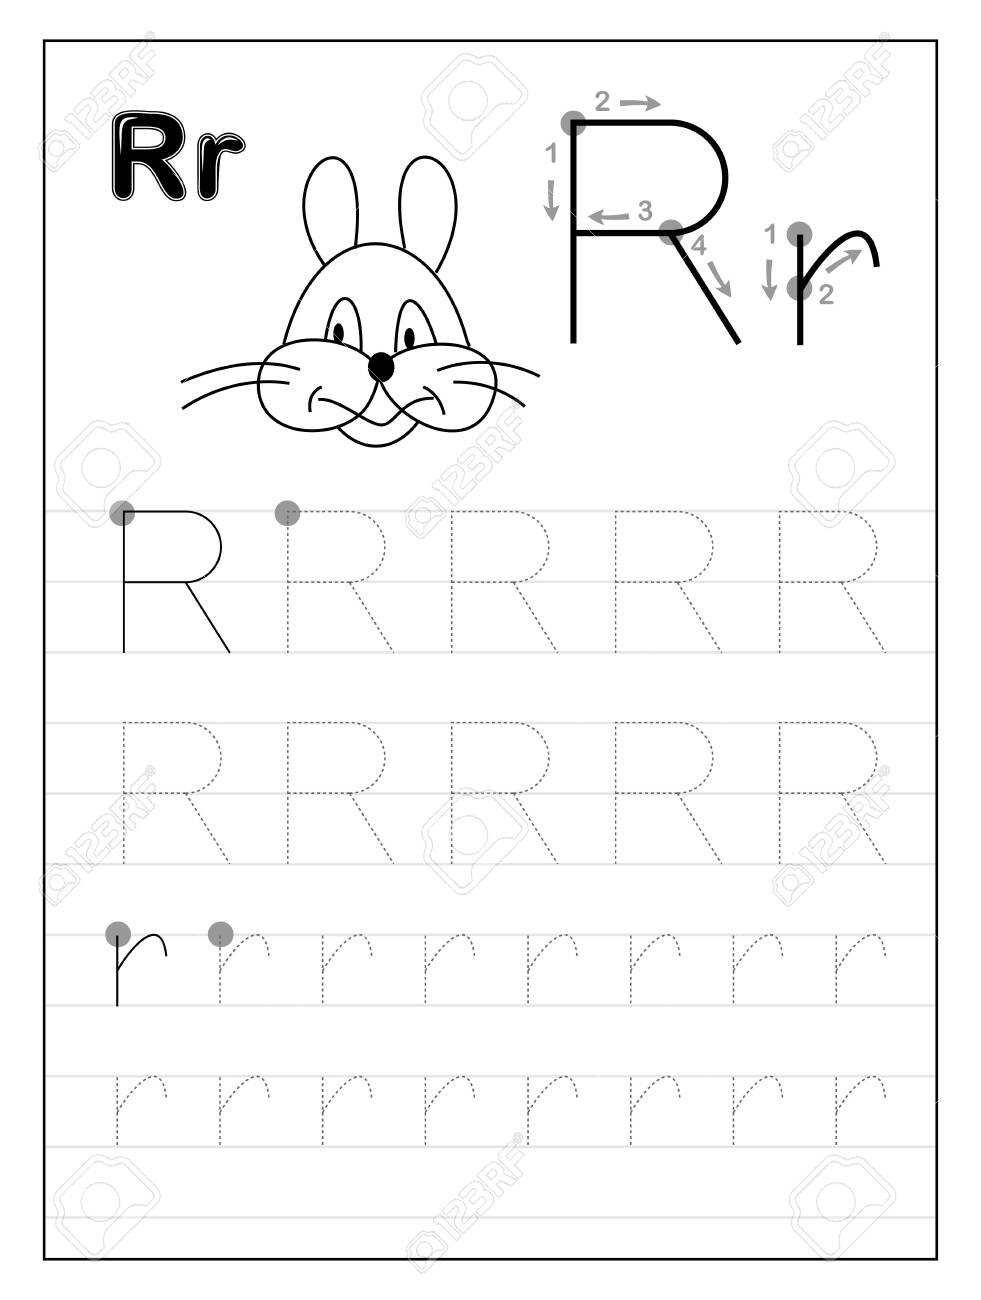 Tracing Alphabet Letter R. Black And White Educational Pages.. within R Letter Tracing